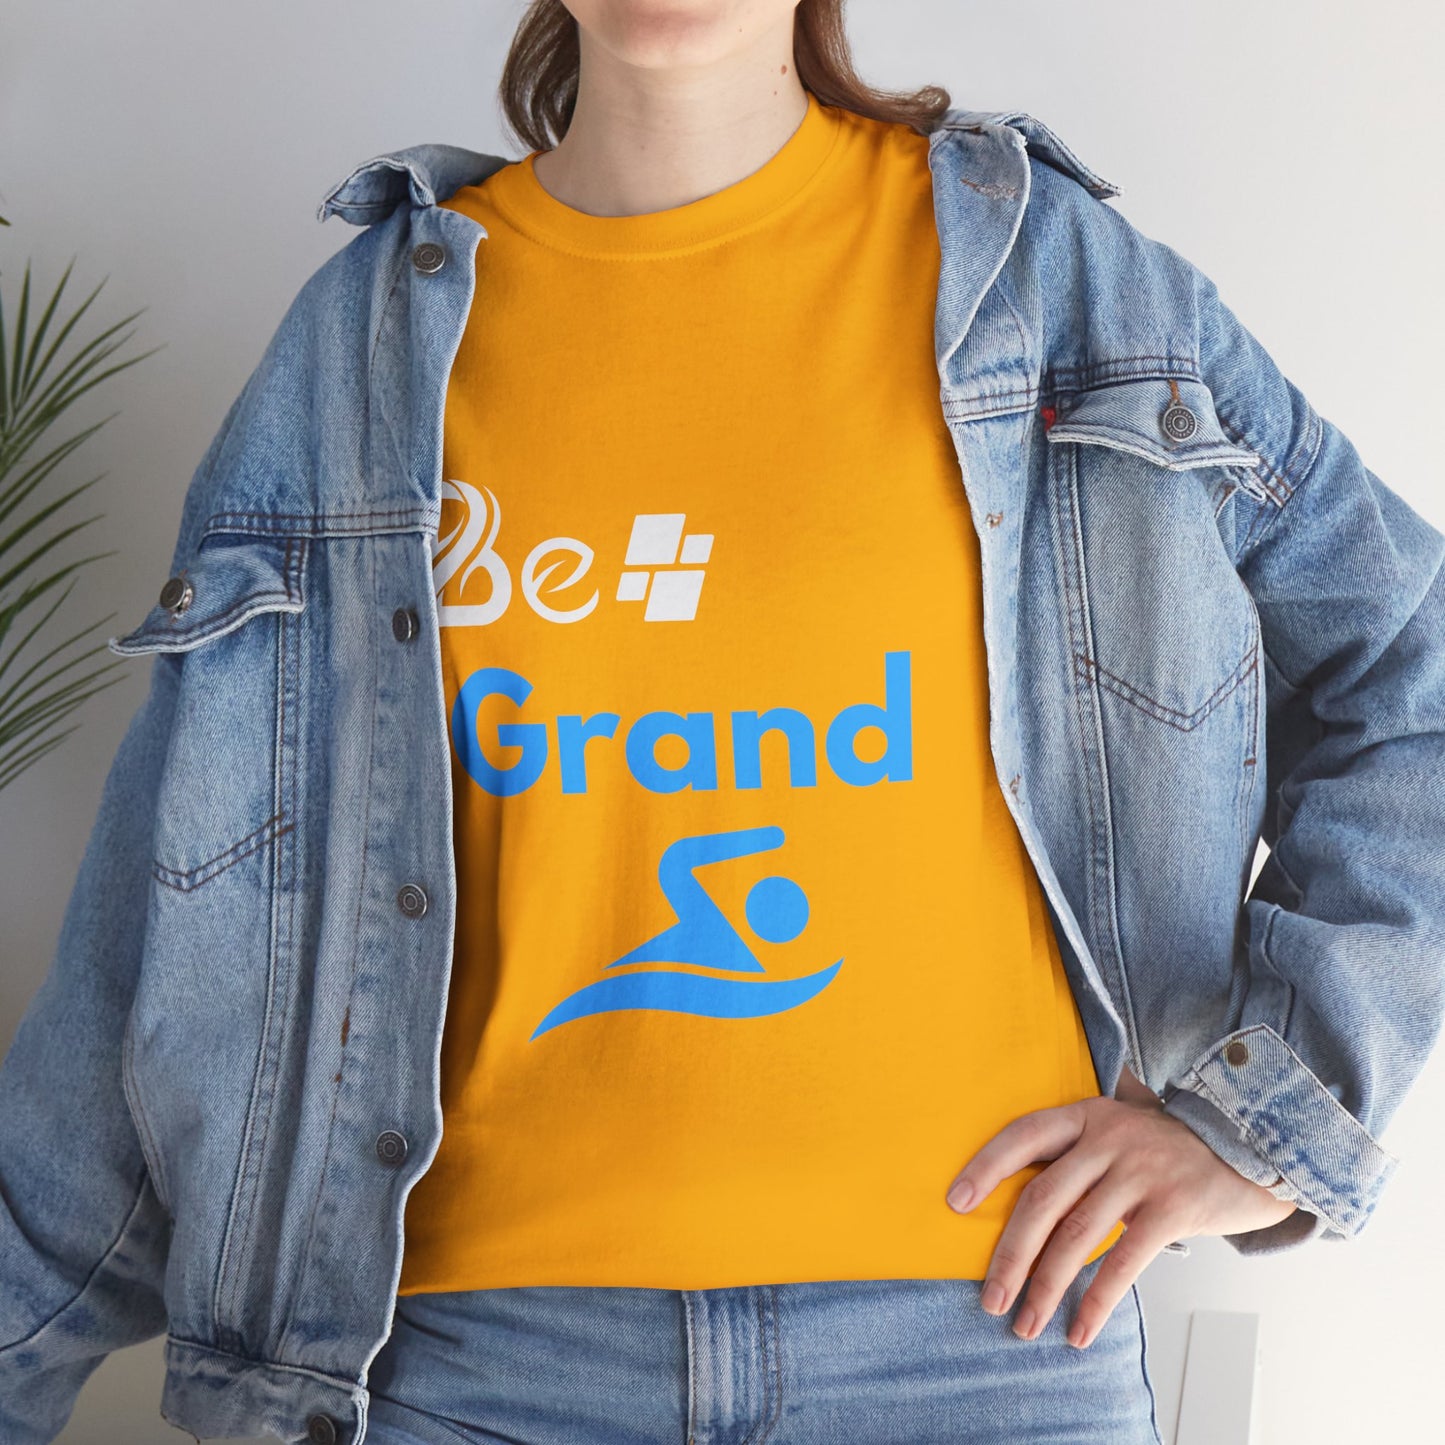 Be Grand Tee: Style, Comfort & Fun for Everyone - BeinCart